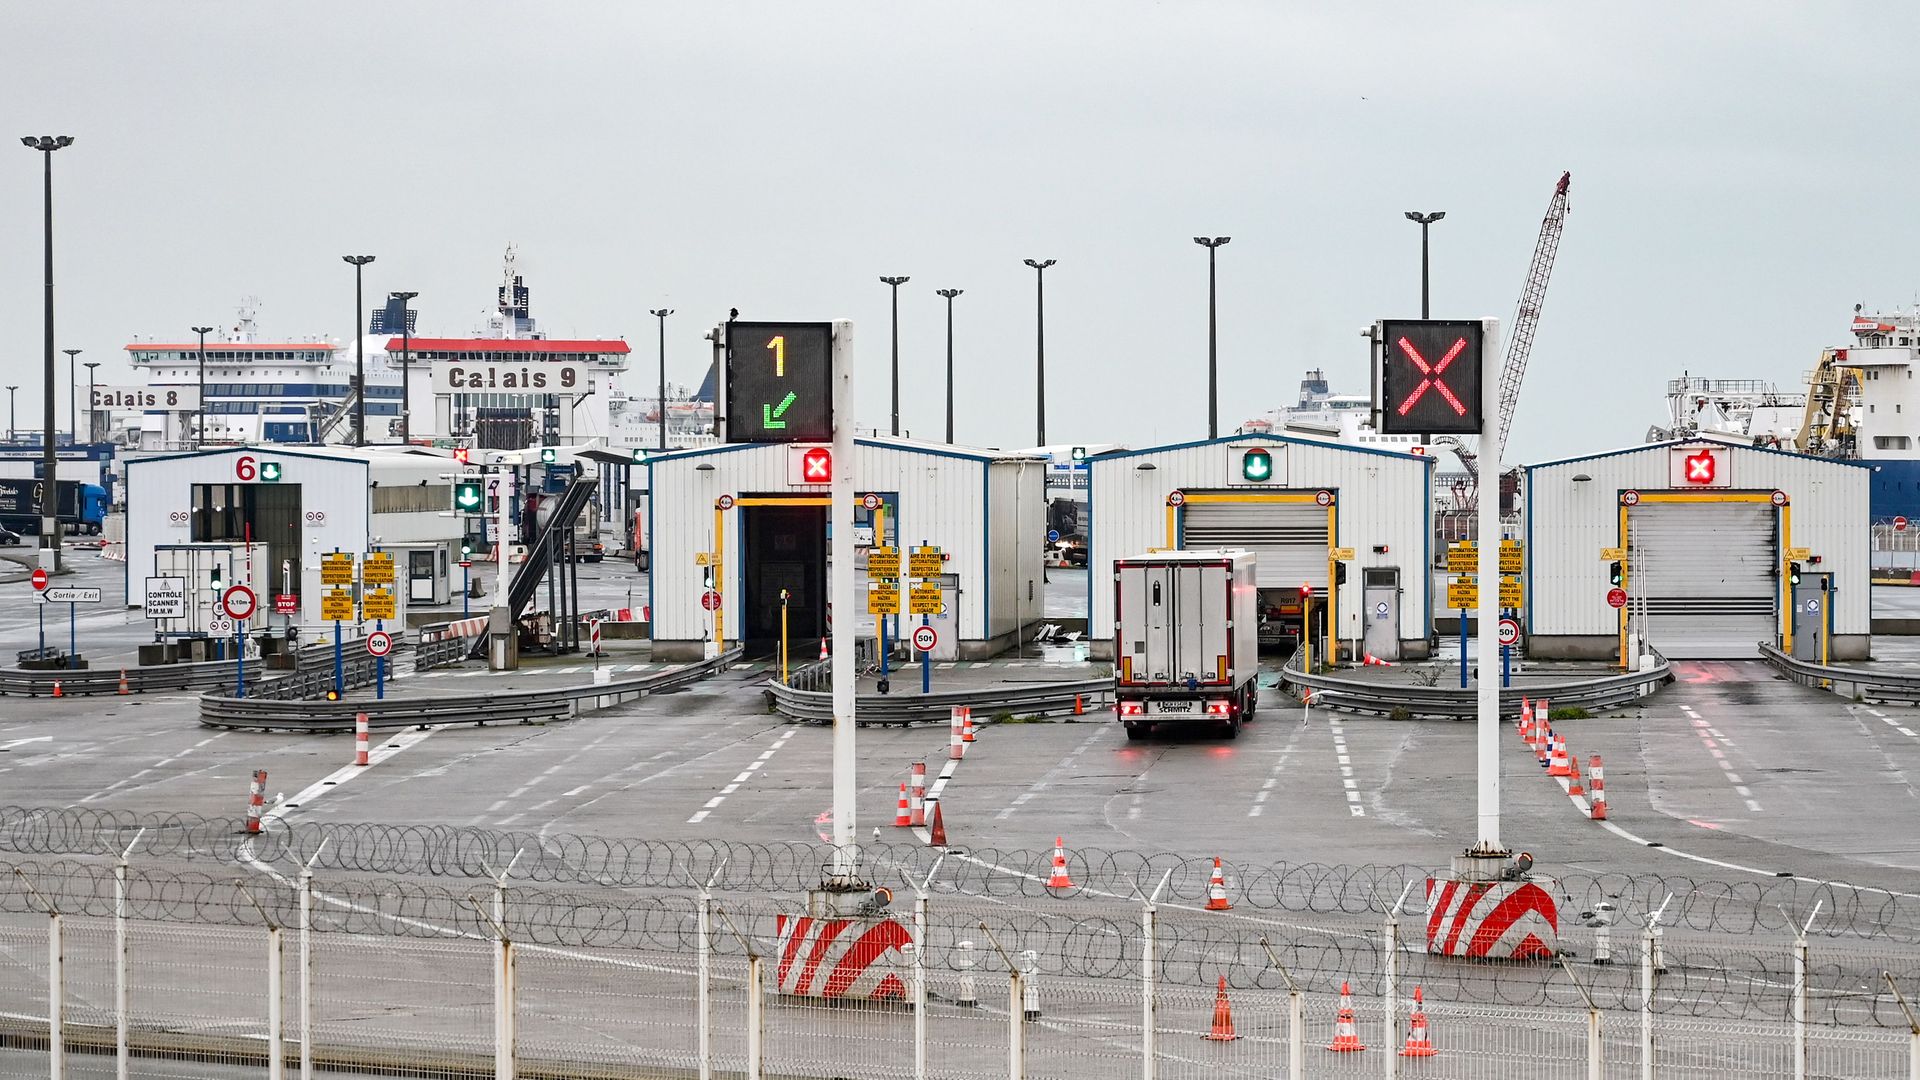 The checkpoint at the port of Calais - Credit: AFP via Getty Images